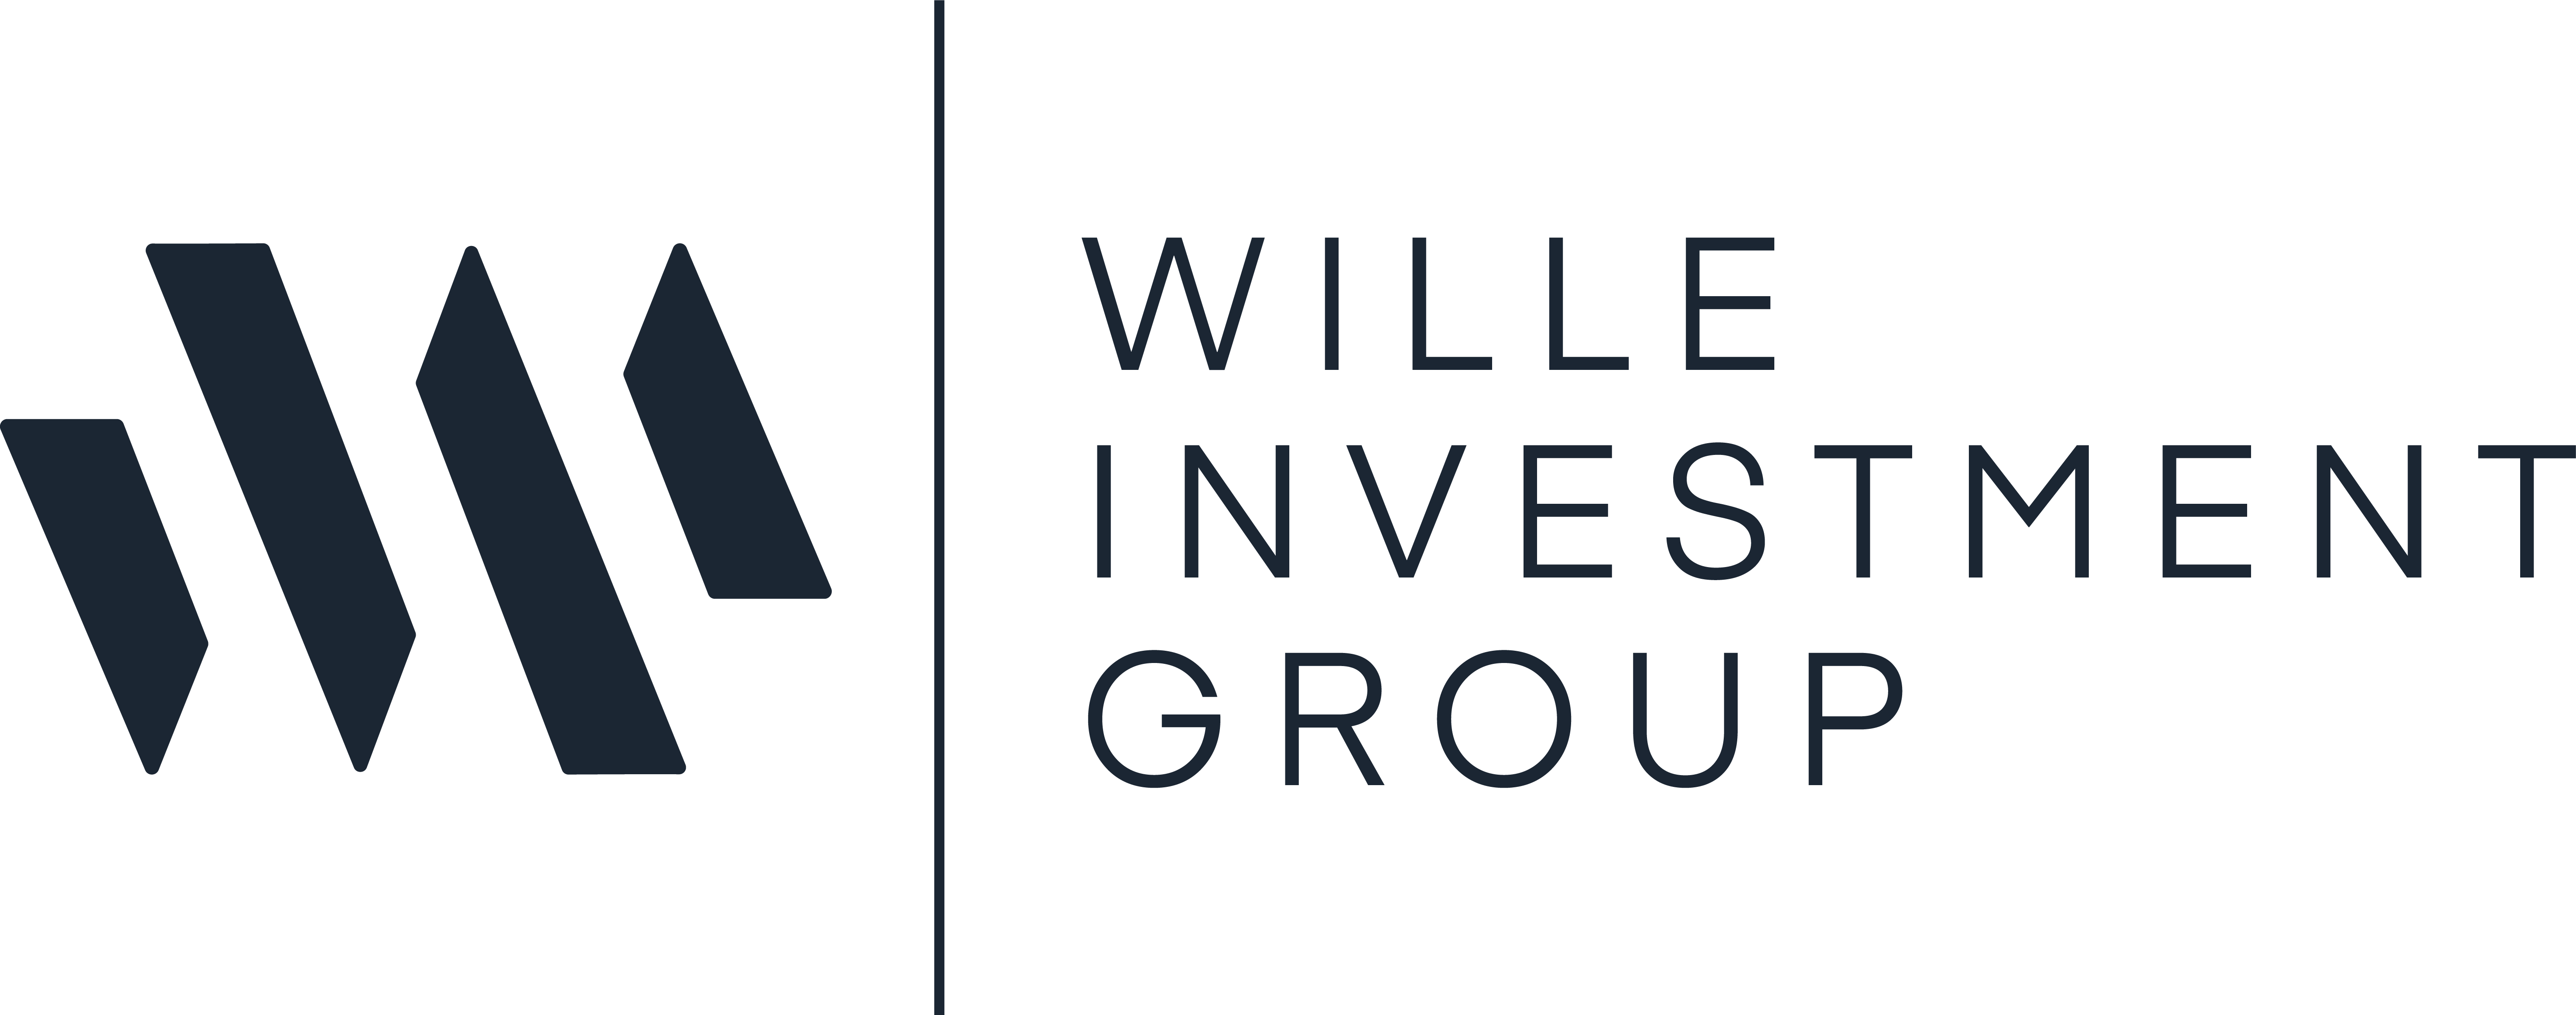 Wille Investment Group Logo